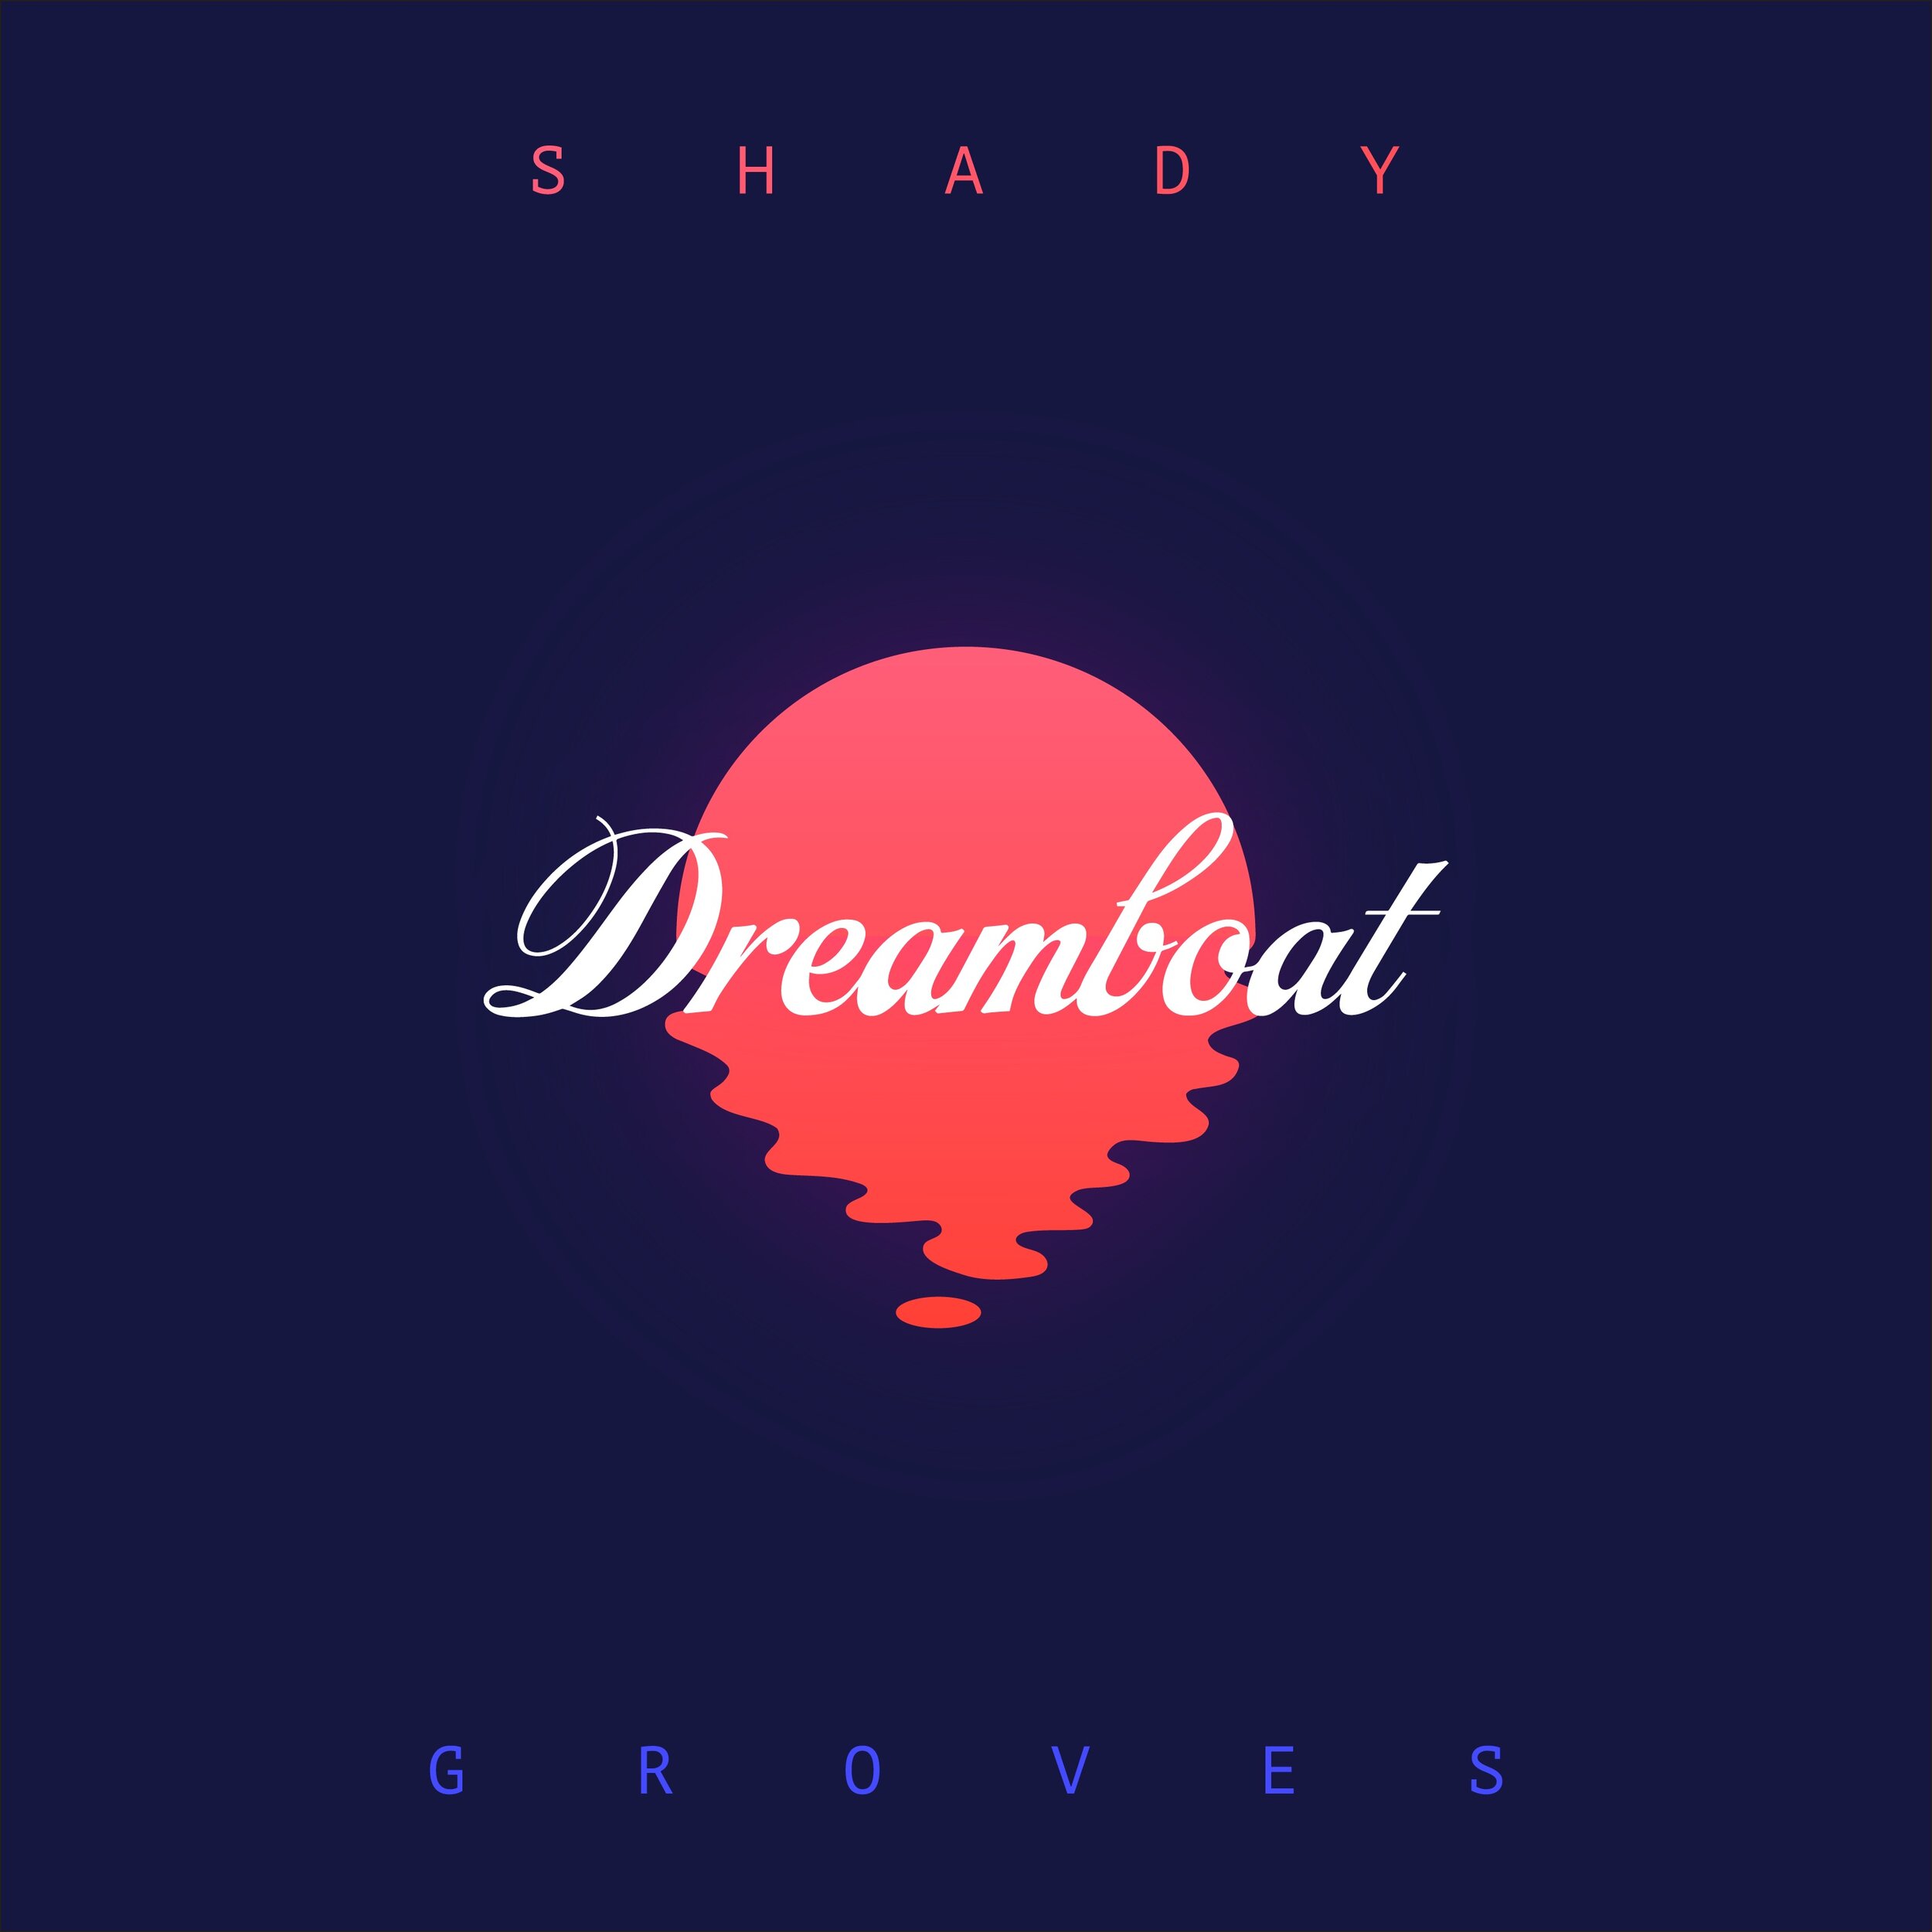 Shady Groves - Dreamboat_ front Album Art-by Connor Irwin .jpg